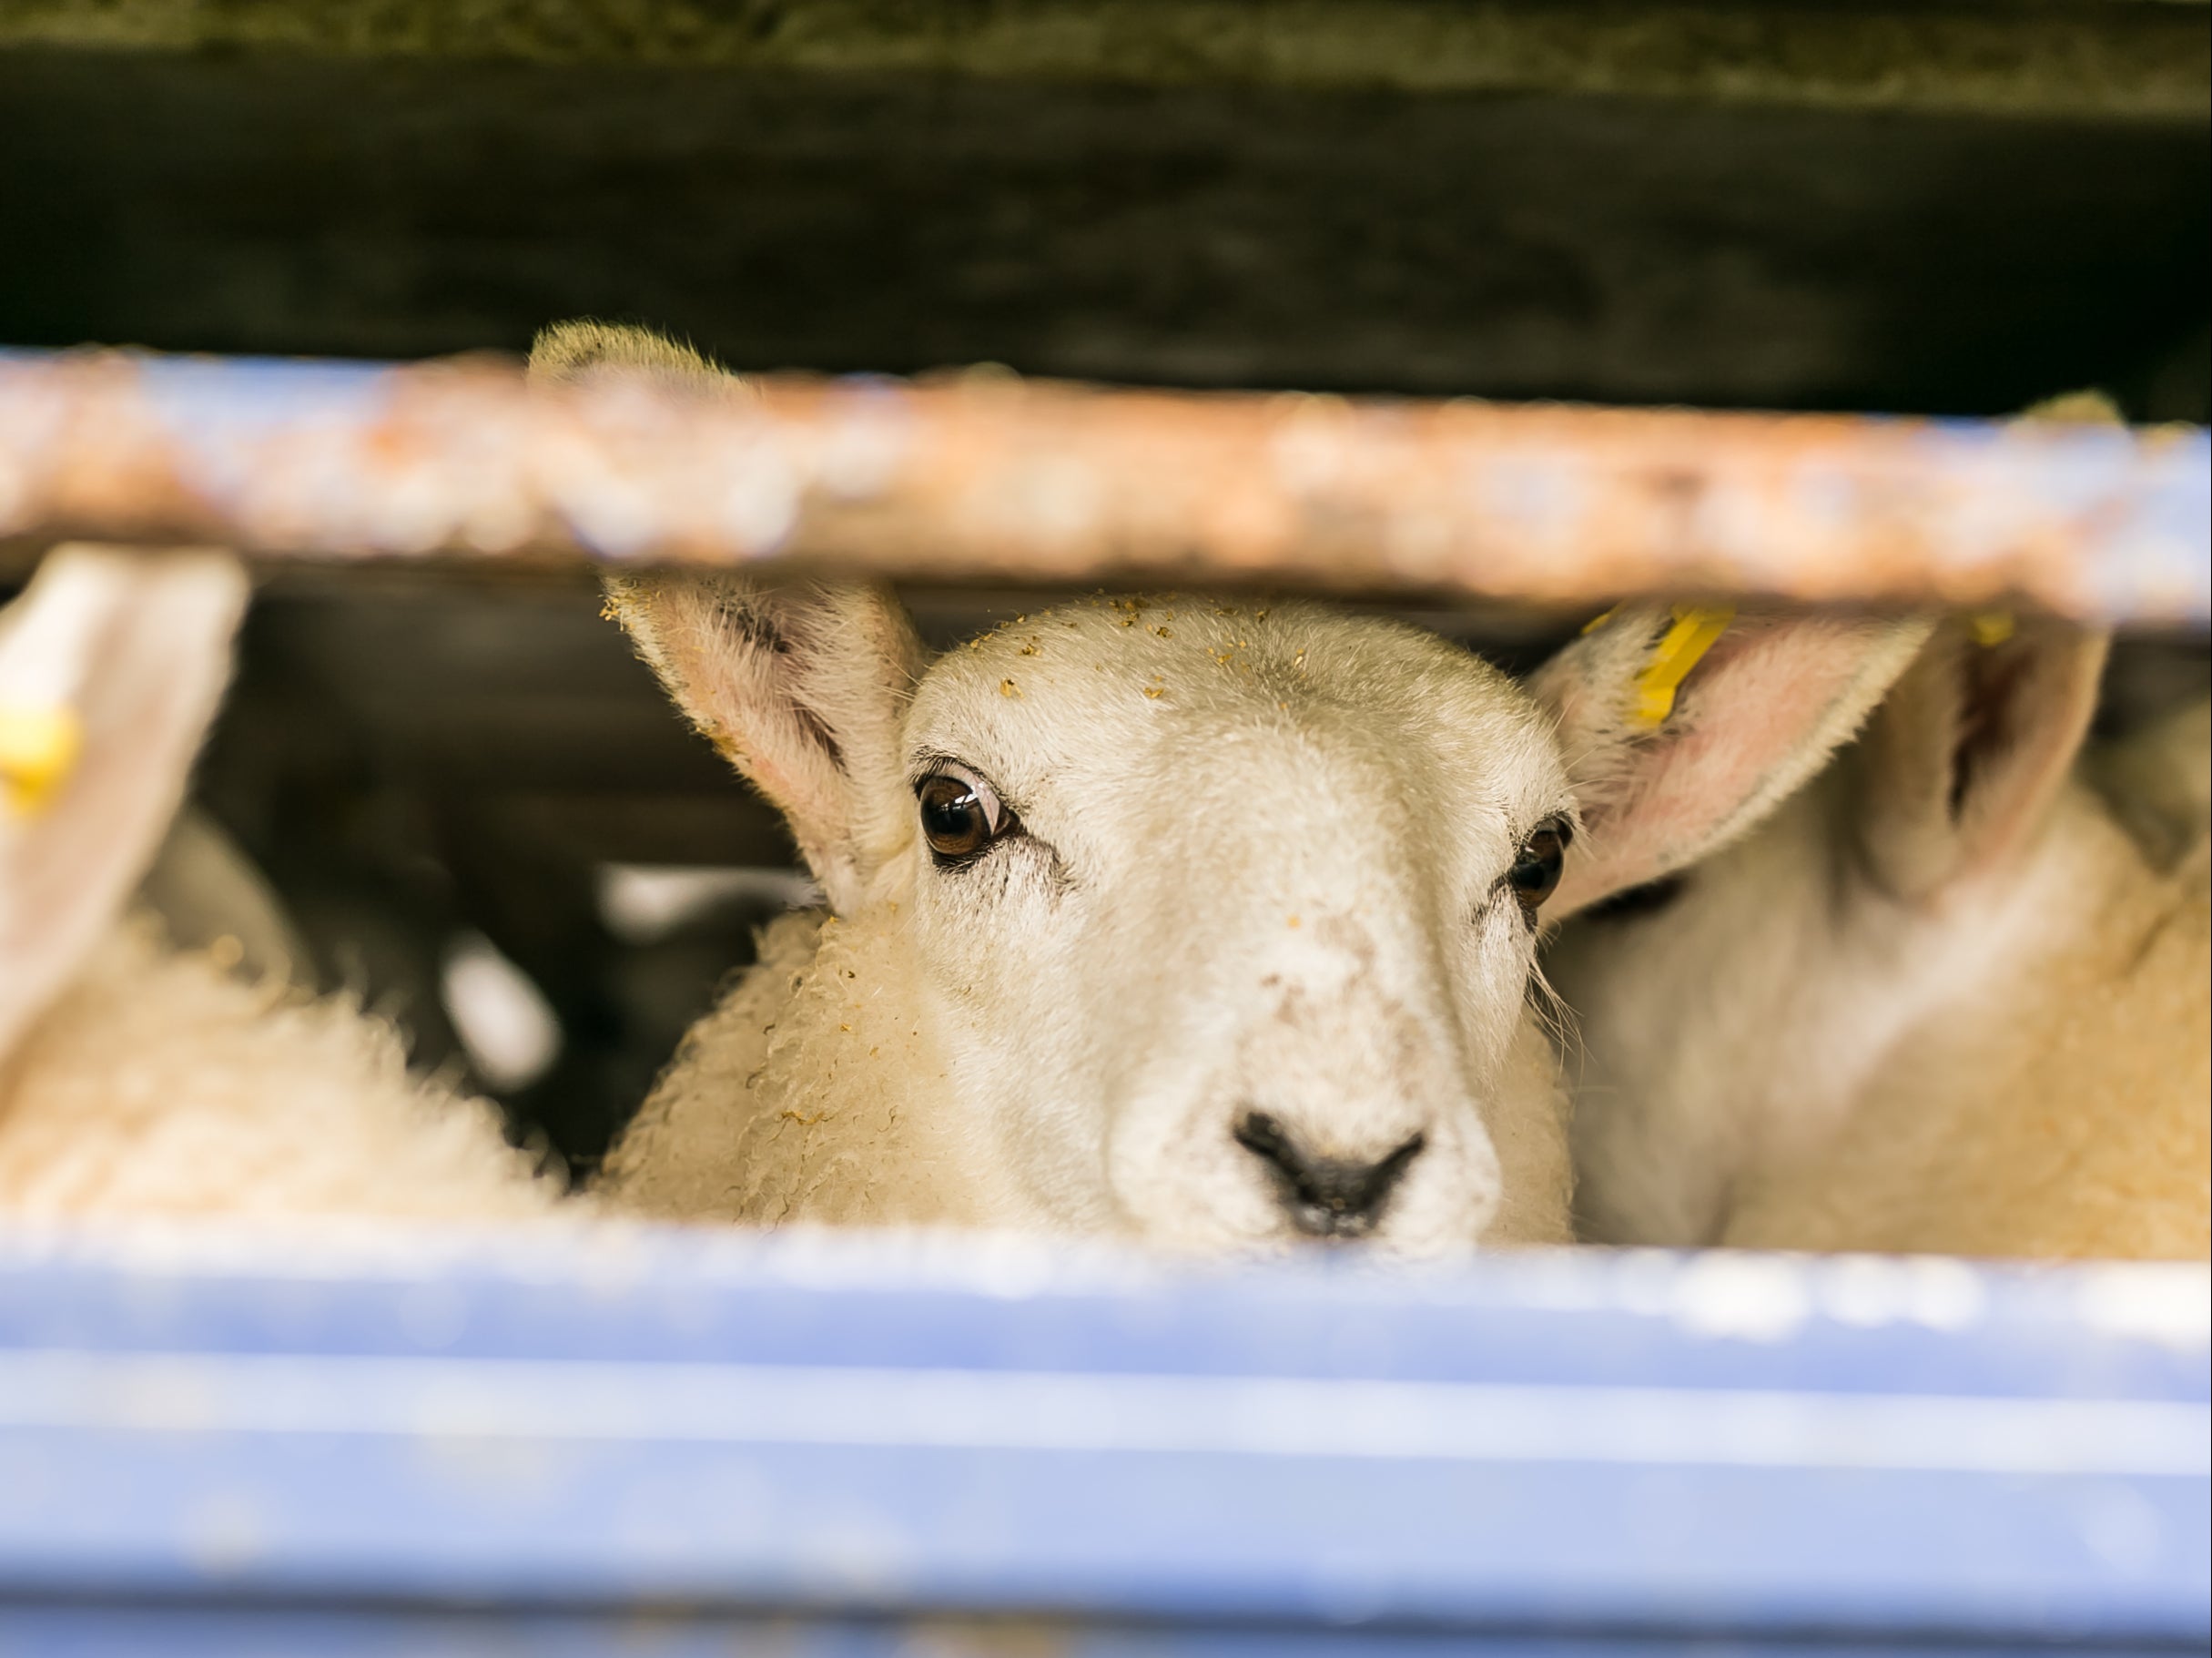 Around 6,400 live animals were exported direct to slaughter from the UK in 2018